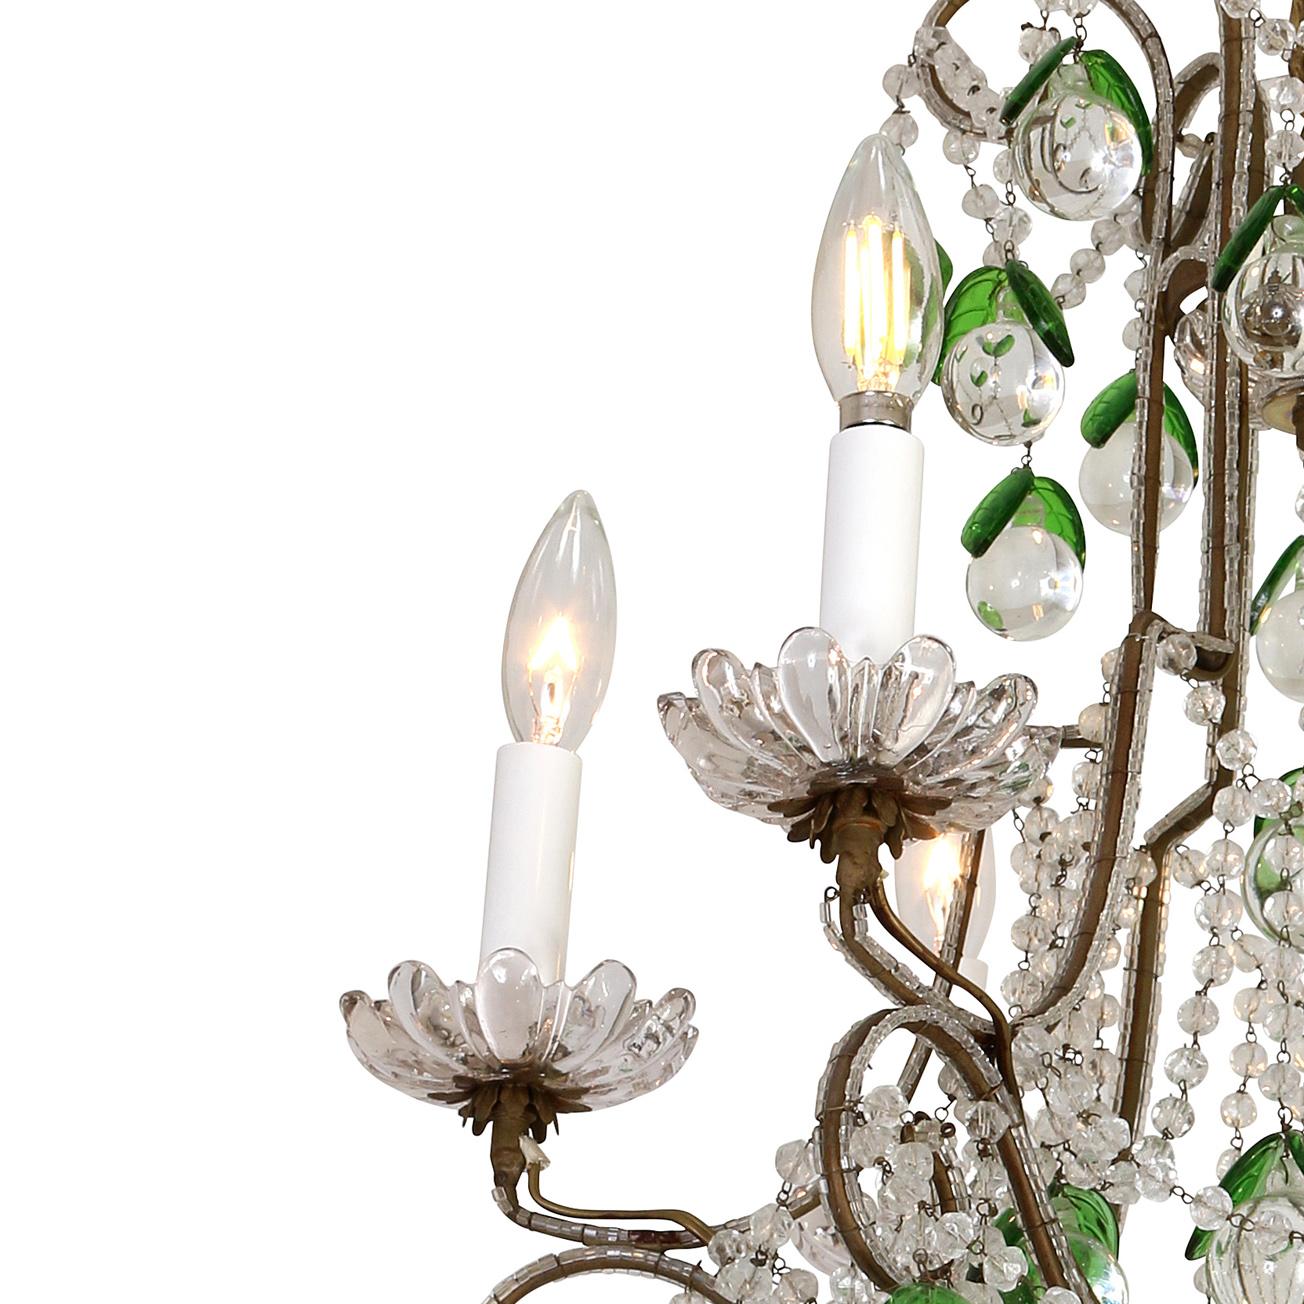 This fanciful crystal and iron chandelier is composed of six arms with lovely floral bobeches.  The silvered iron frame is decorated with crystal balls and beads, accented with green glass leaves.  The medium size of this piece makes it quite